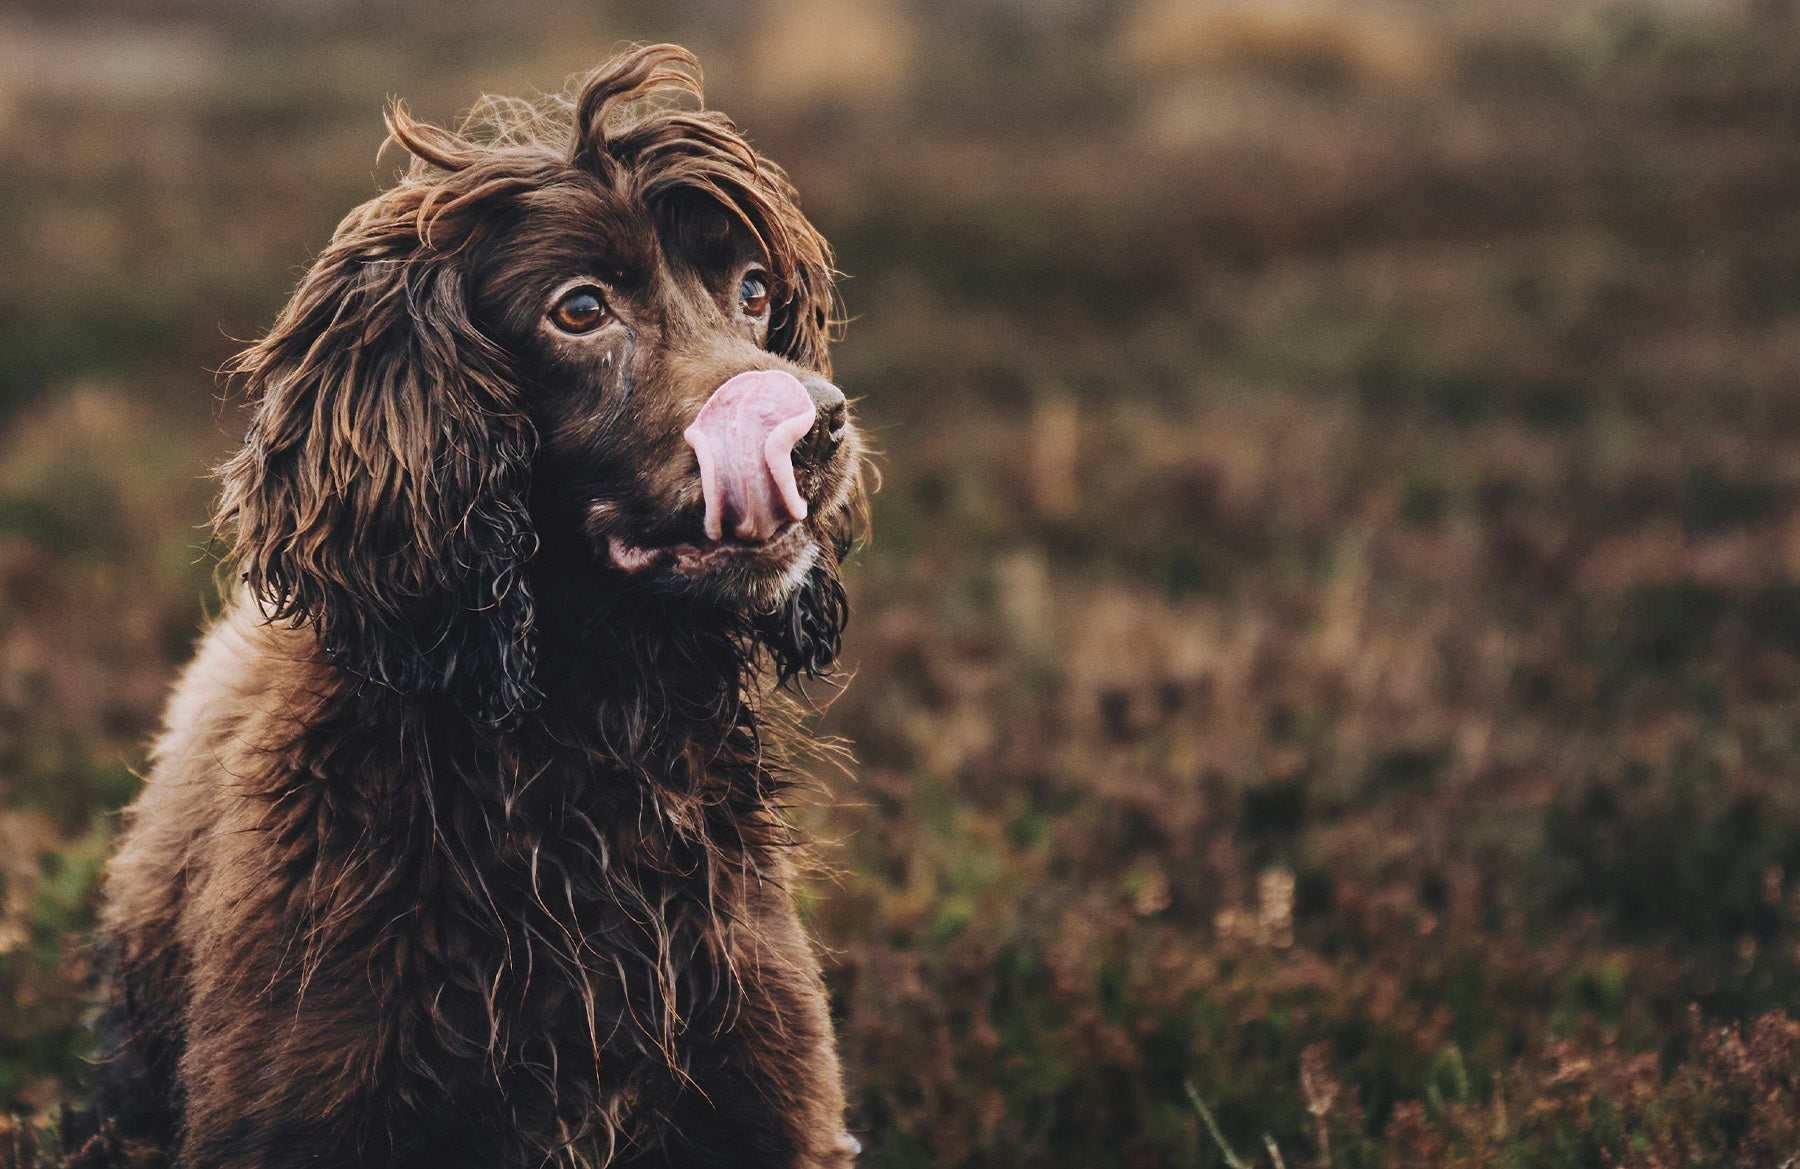 What grains are good for dogs?